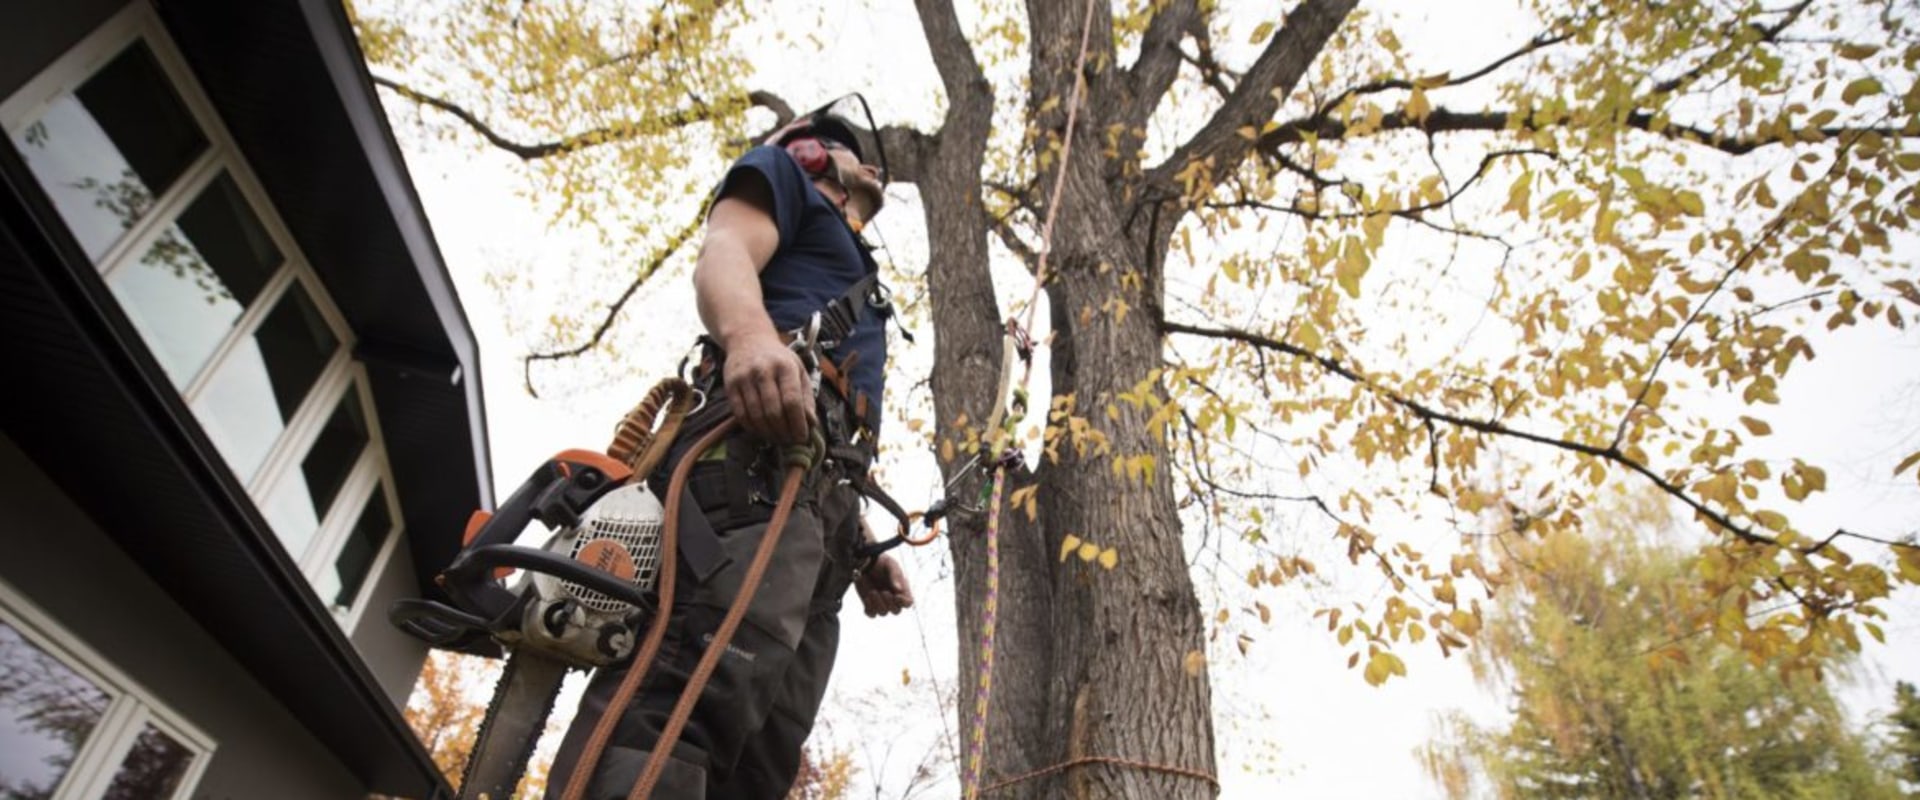 What is a professional tree feller called?